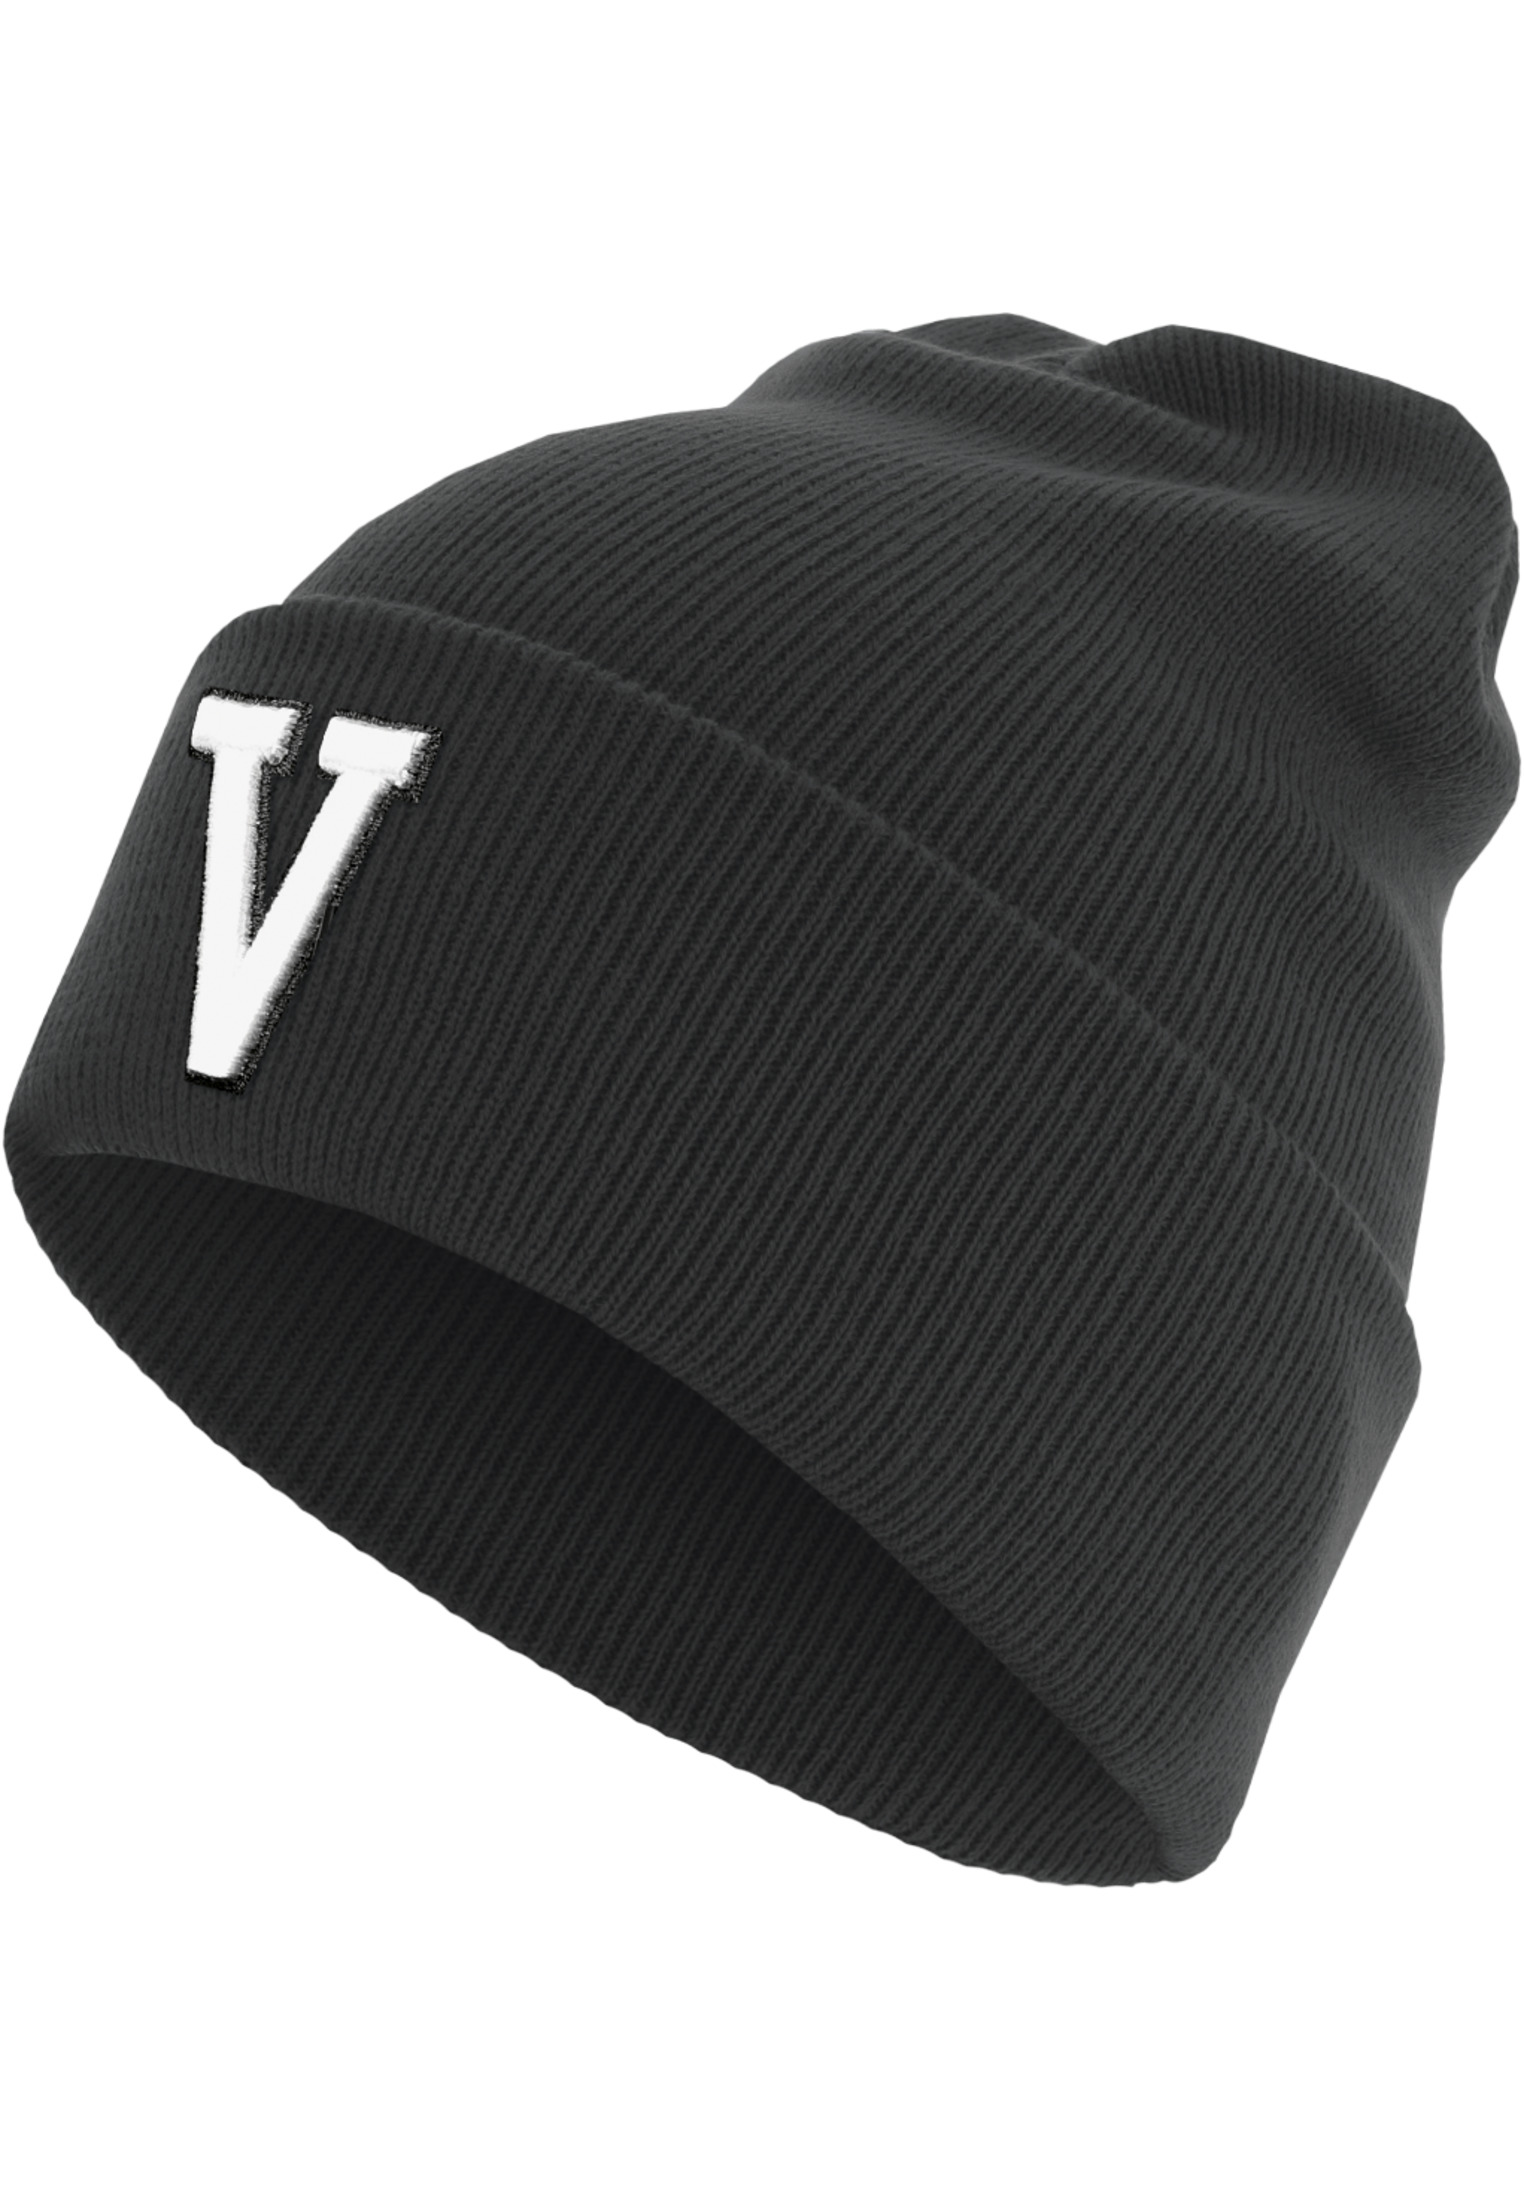 Caps & Beanies Letter Cuff Knit Beanie in Farbe V